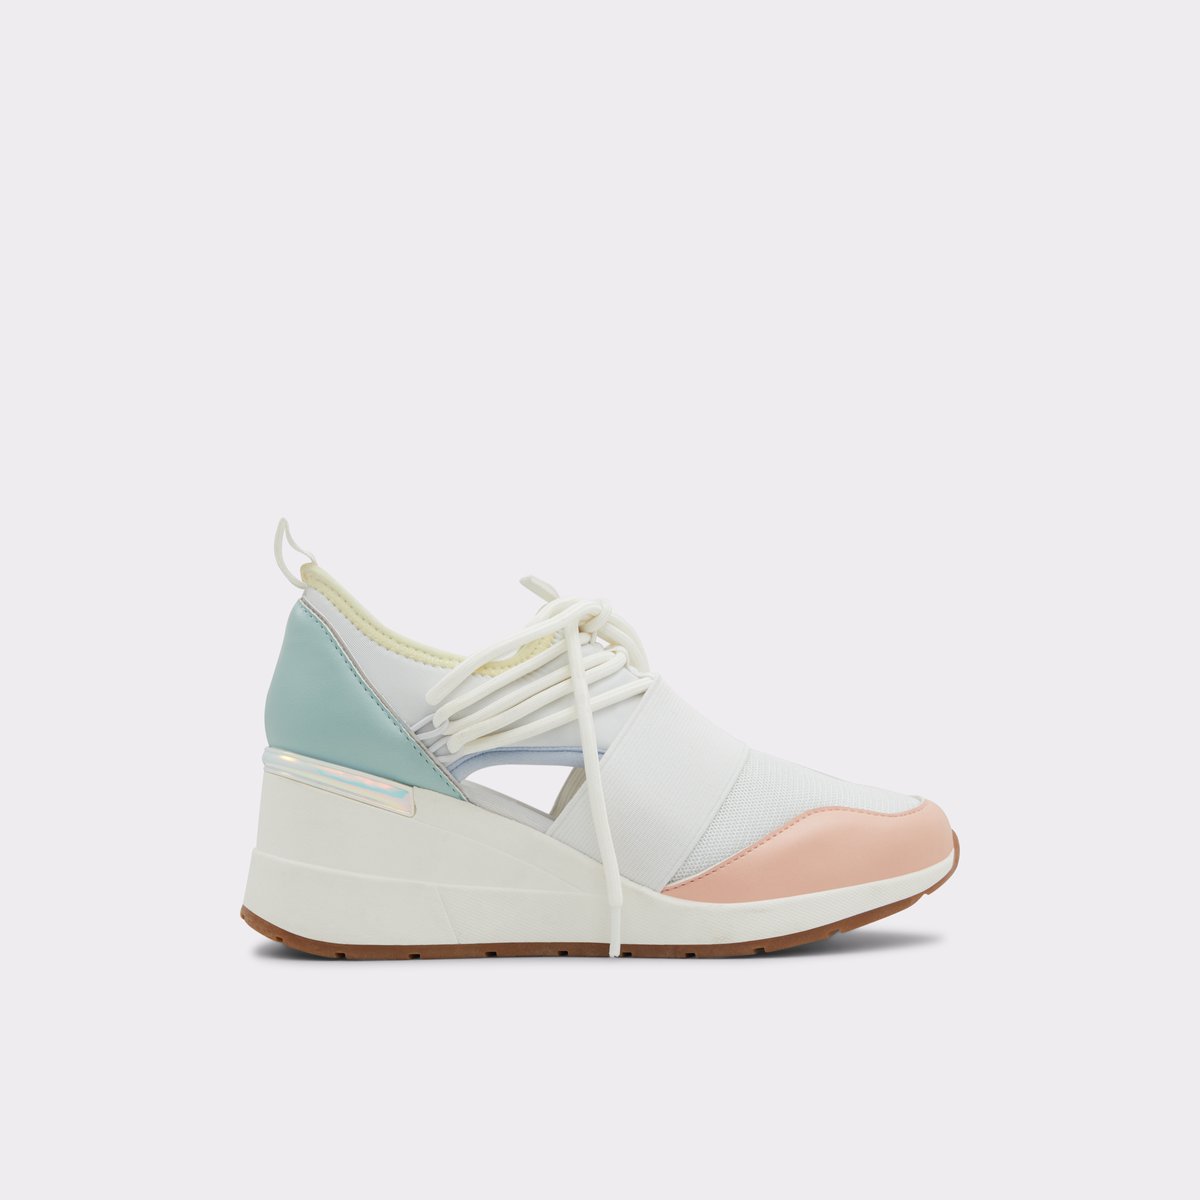 Bebe Synthetic Chiara Platform Sneakers in Mint Green Womens Shoes Trainers Low-top trainers 